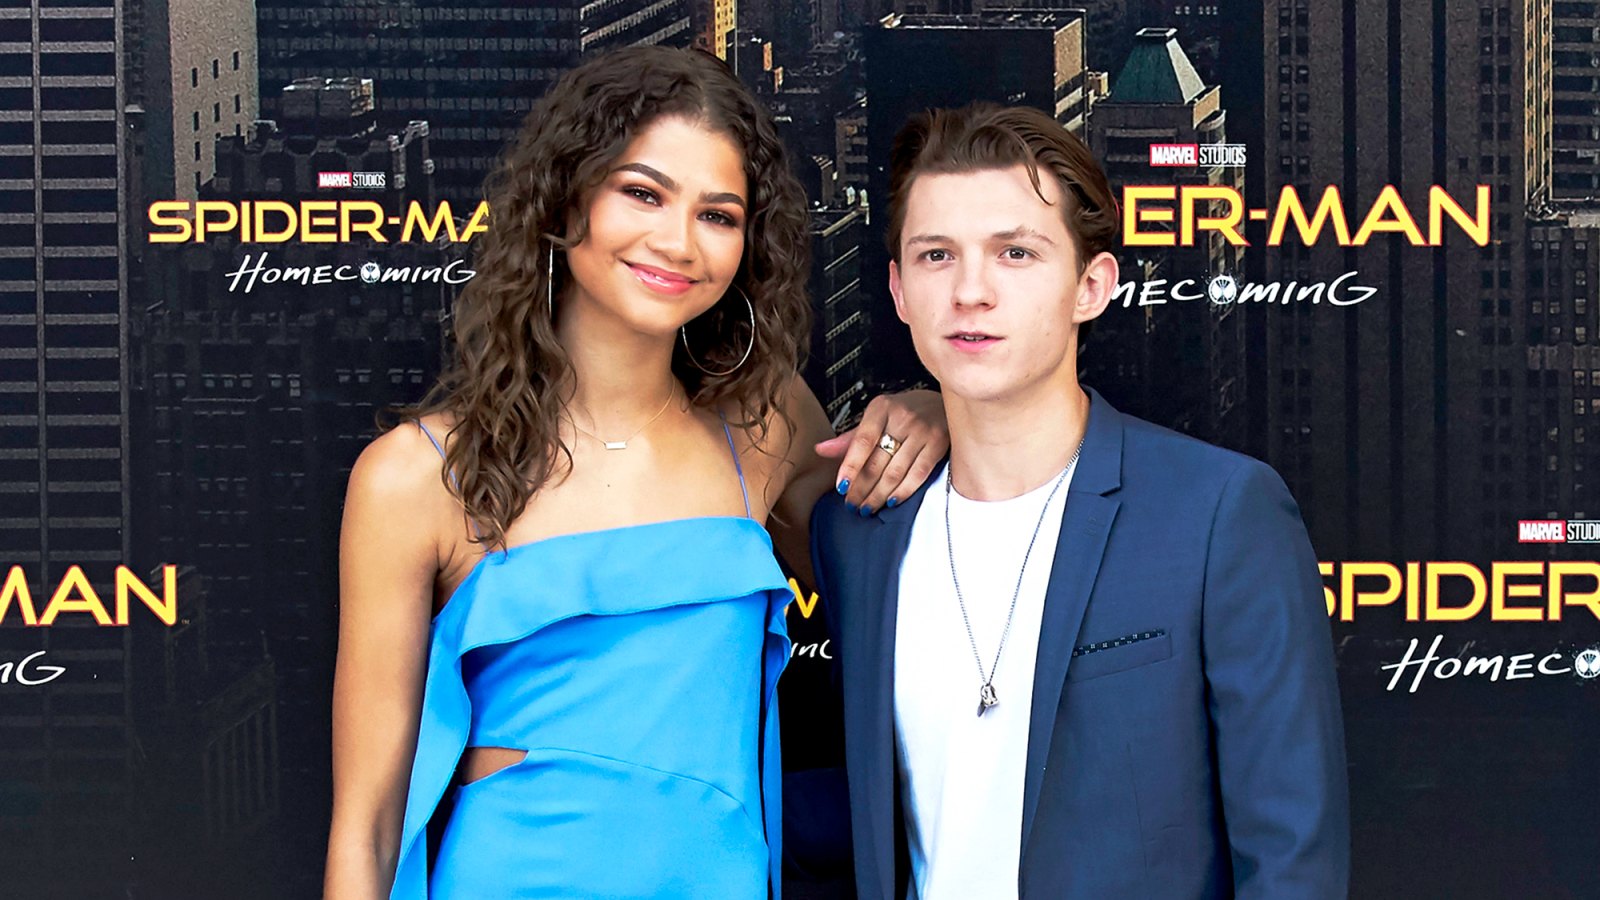 Zendaya and Tom Holland attend 'Spider-Man: Homecoming' 2017 photocall at the Villamagna Hotel in Madrid, Spain.